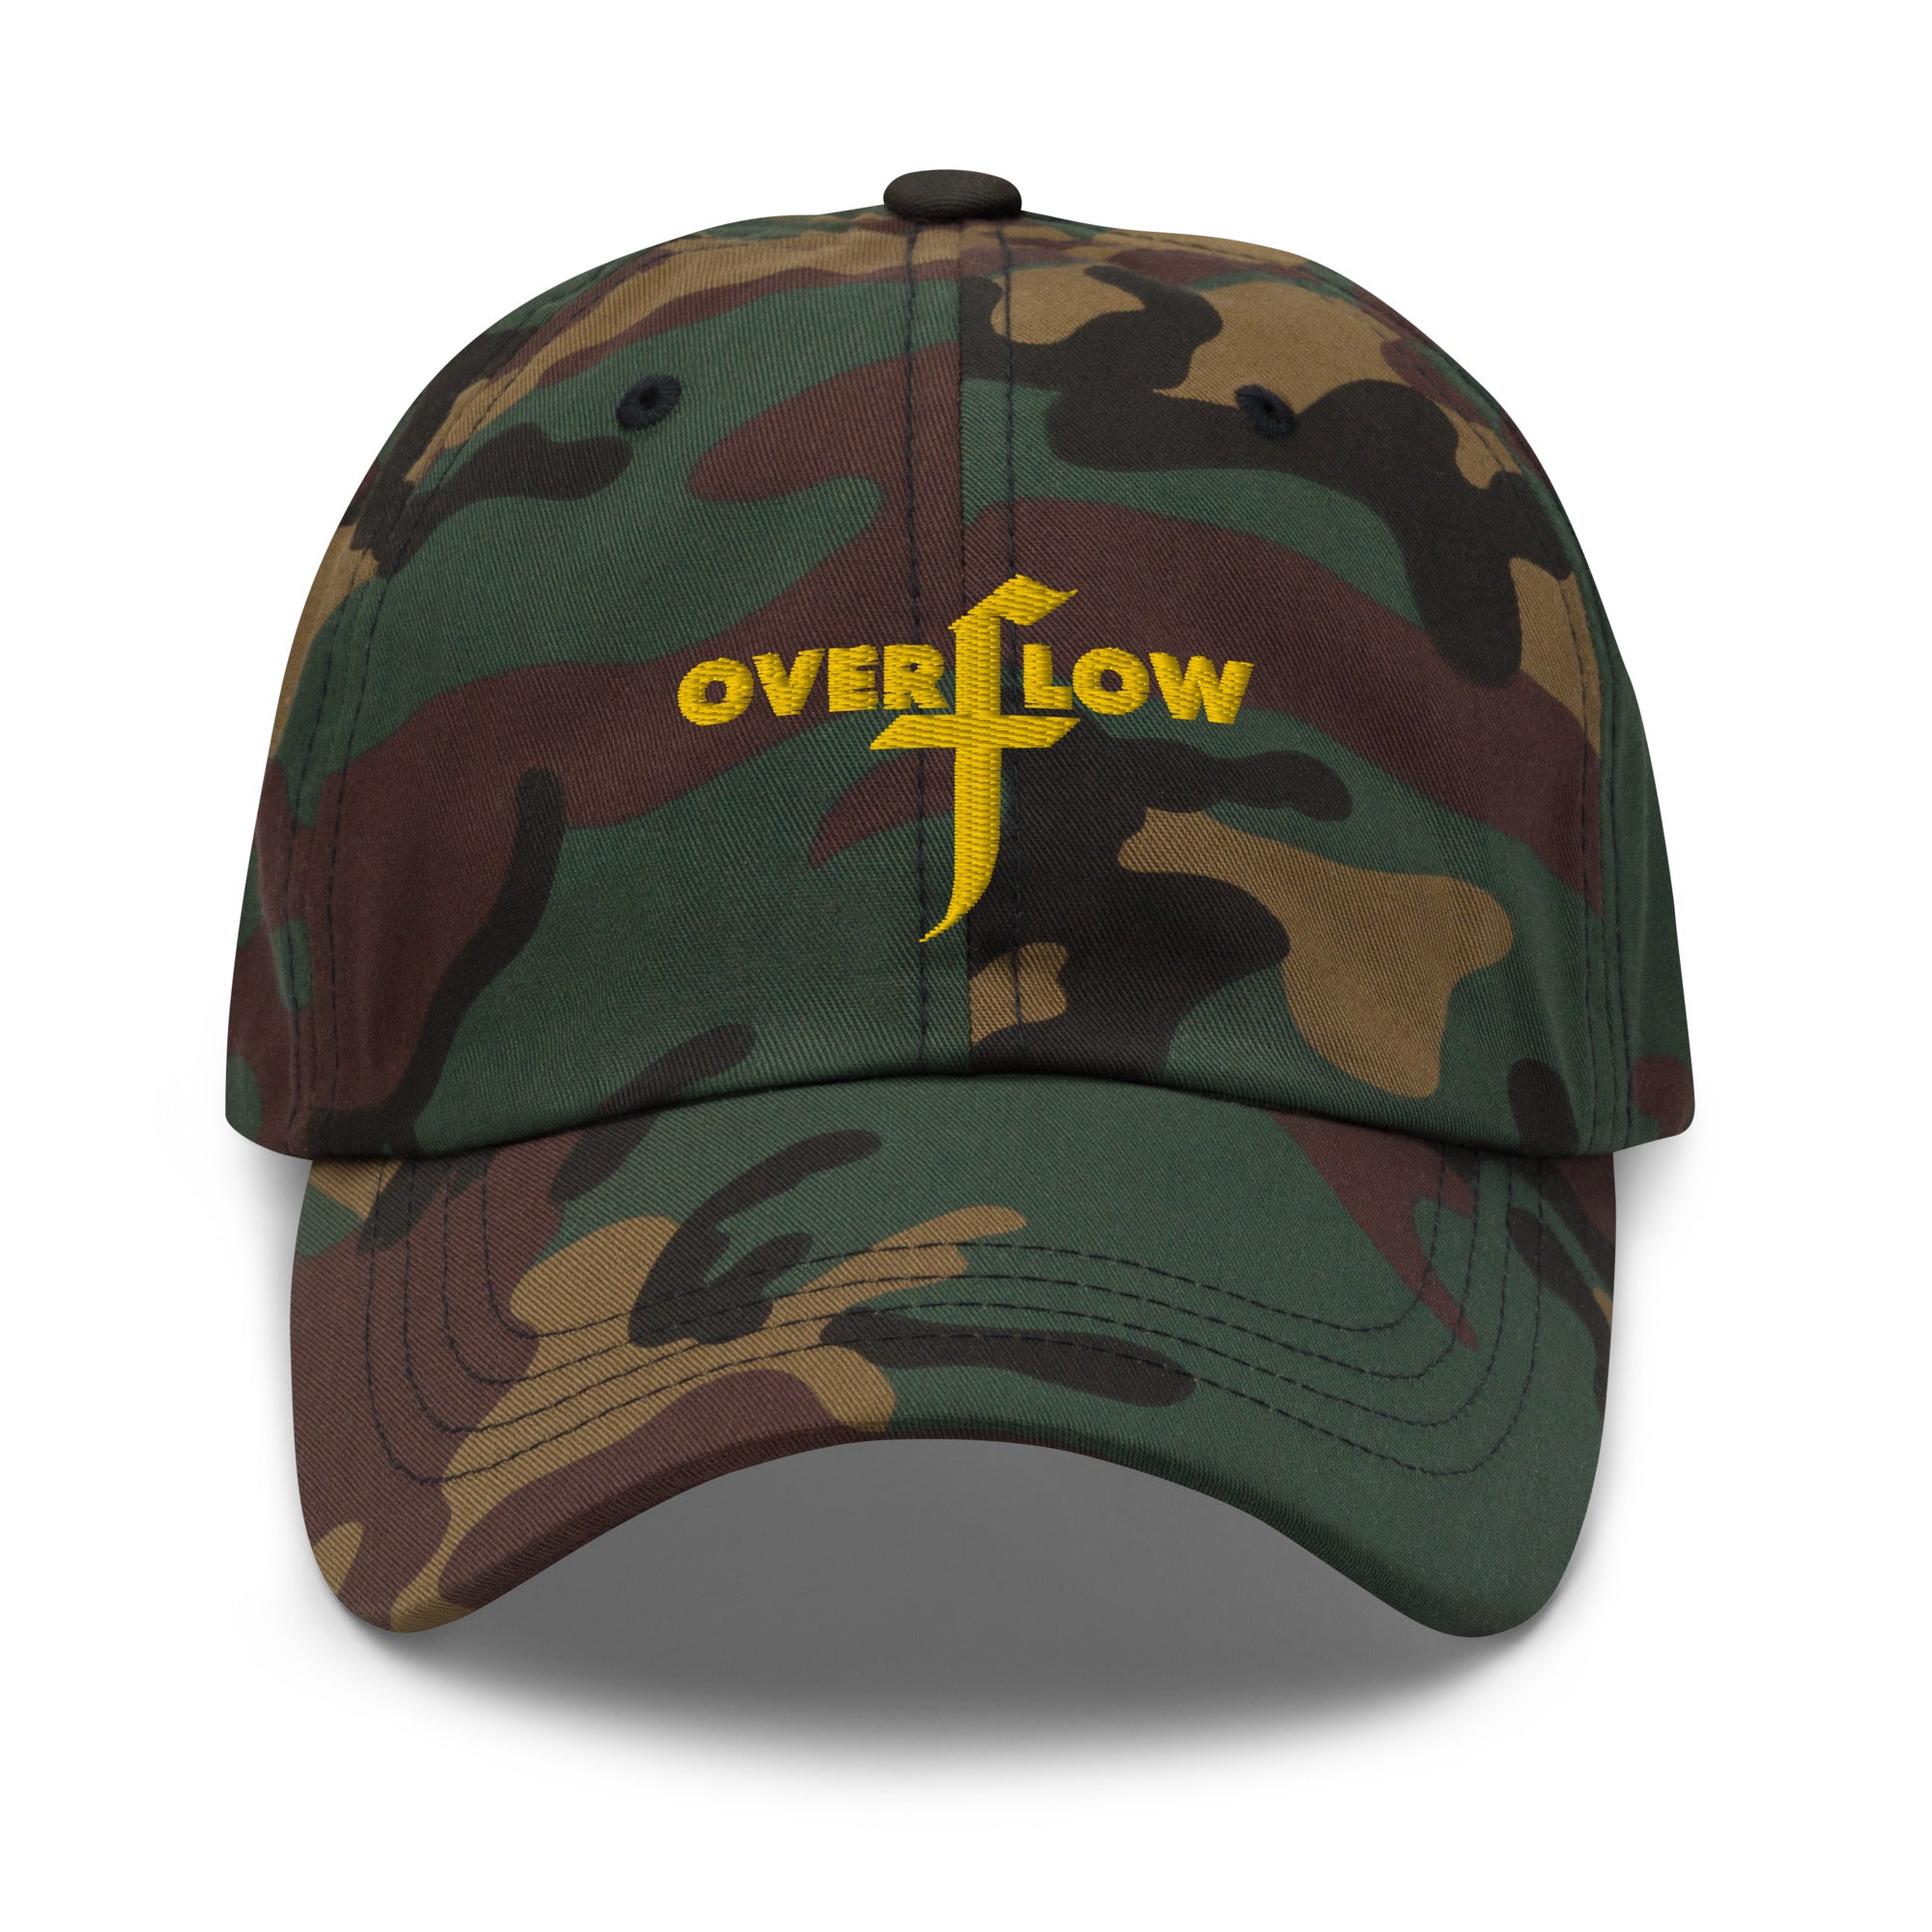 Overflow Camo Dad Hat, Used By God, Used By God Clothing, Christian Apparel, Christian Hats, Christian T-Shirts, Christian Clothing, God Shirts, Christian Sweatshirts, God Clothing, Jesus Hoodie, Jesus Clothes, God Is Dope, Art Of Homage, Red Letter Clothing, Elevated Faith, Active Faith Sports, Beacon Threads, God The Father Apparel